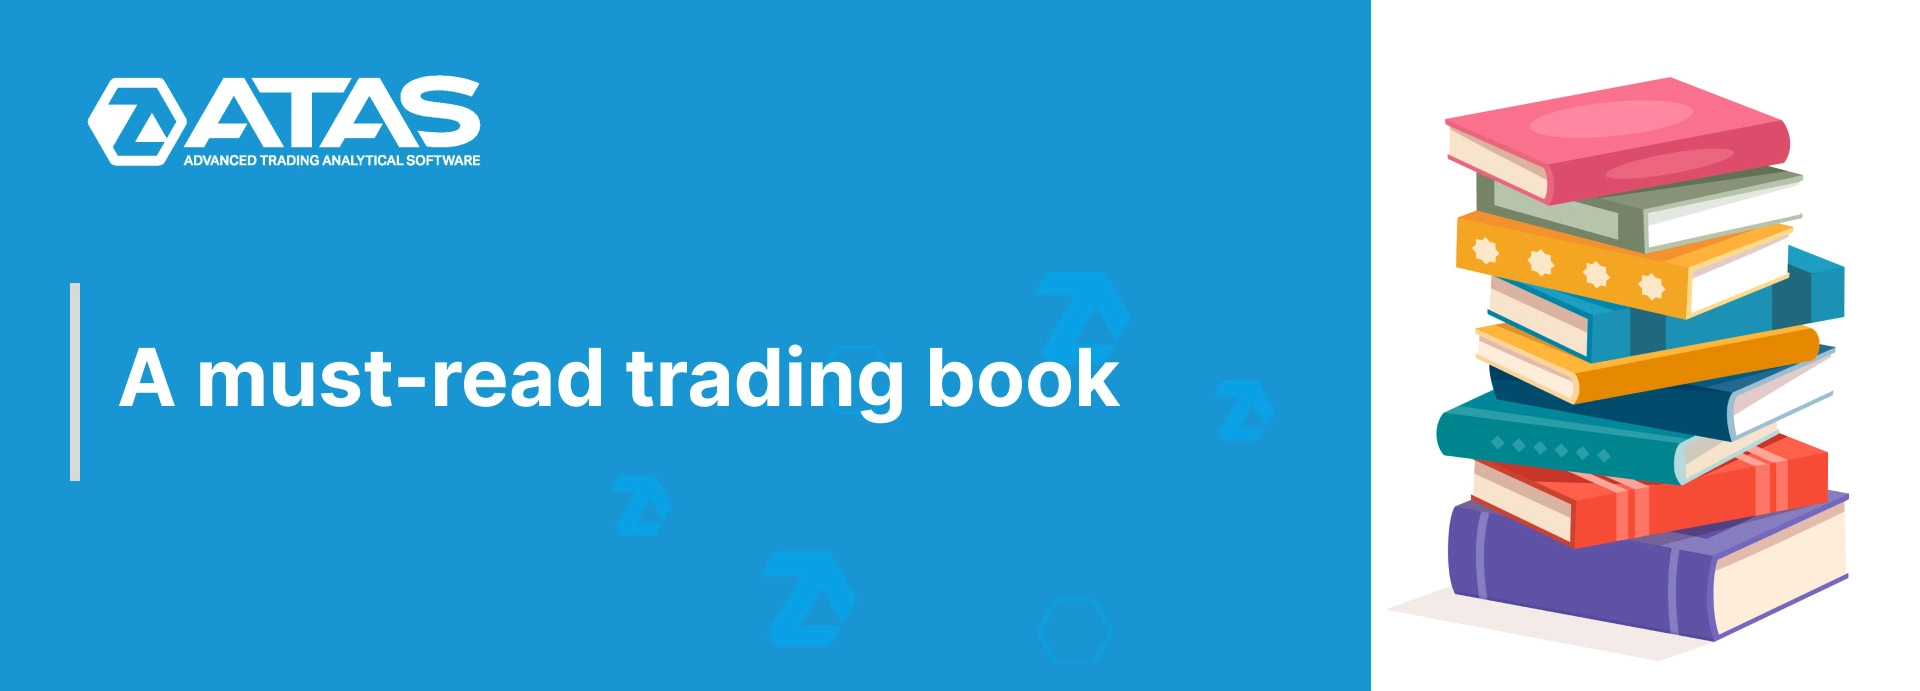 A must-read trading book